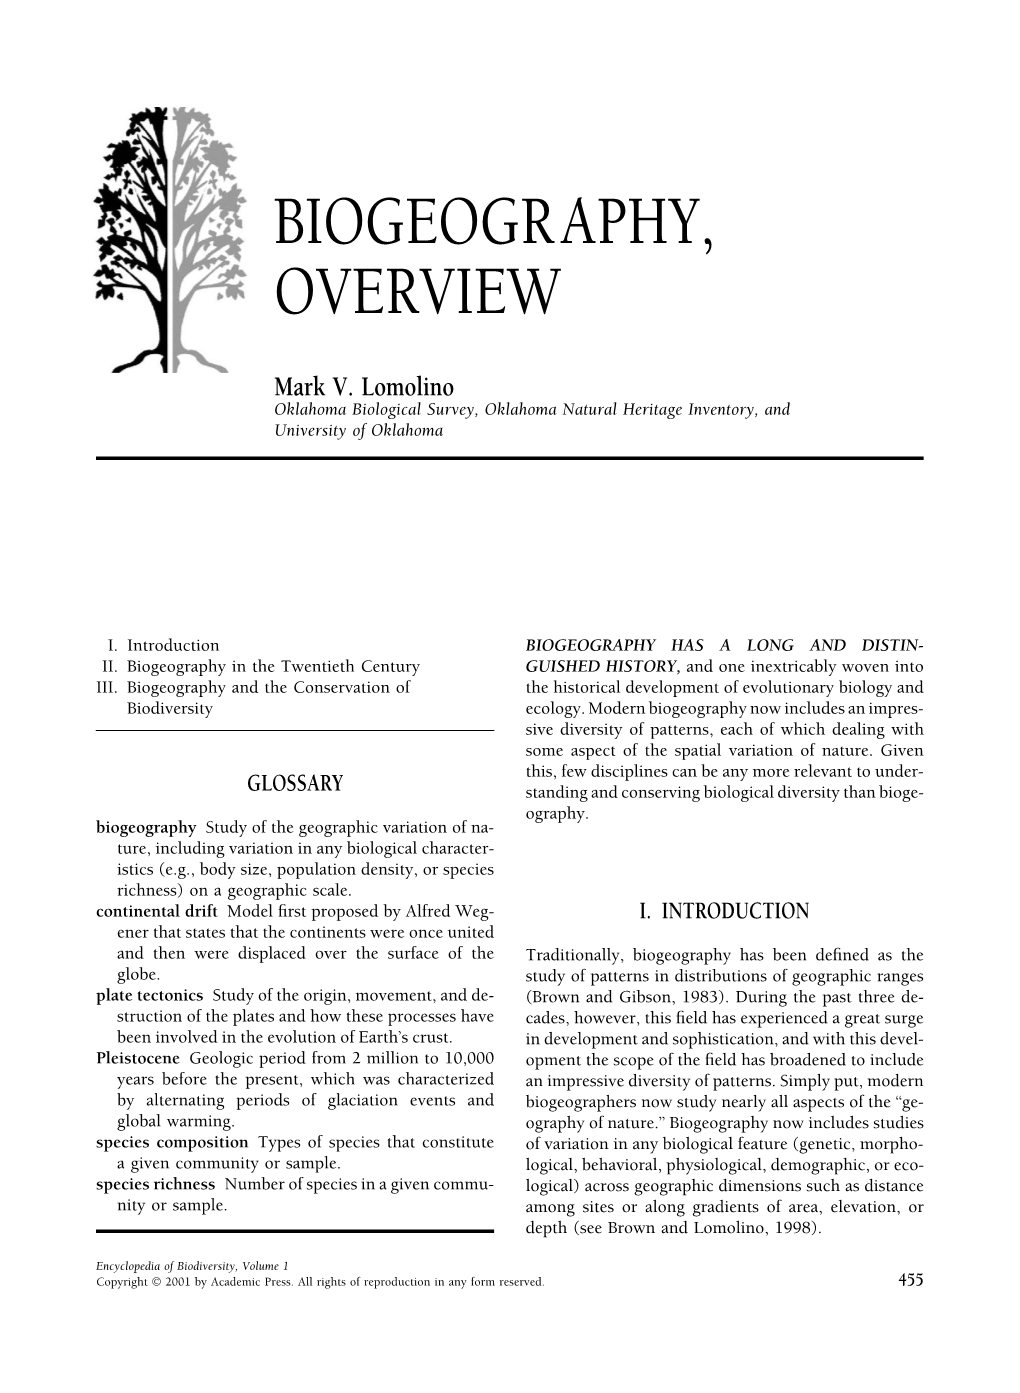 Biogeography, Overview